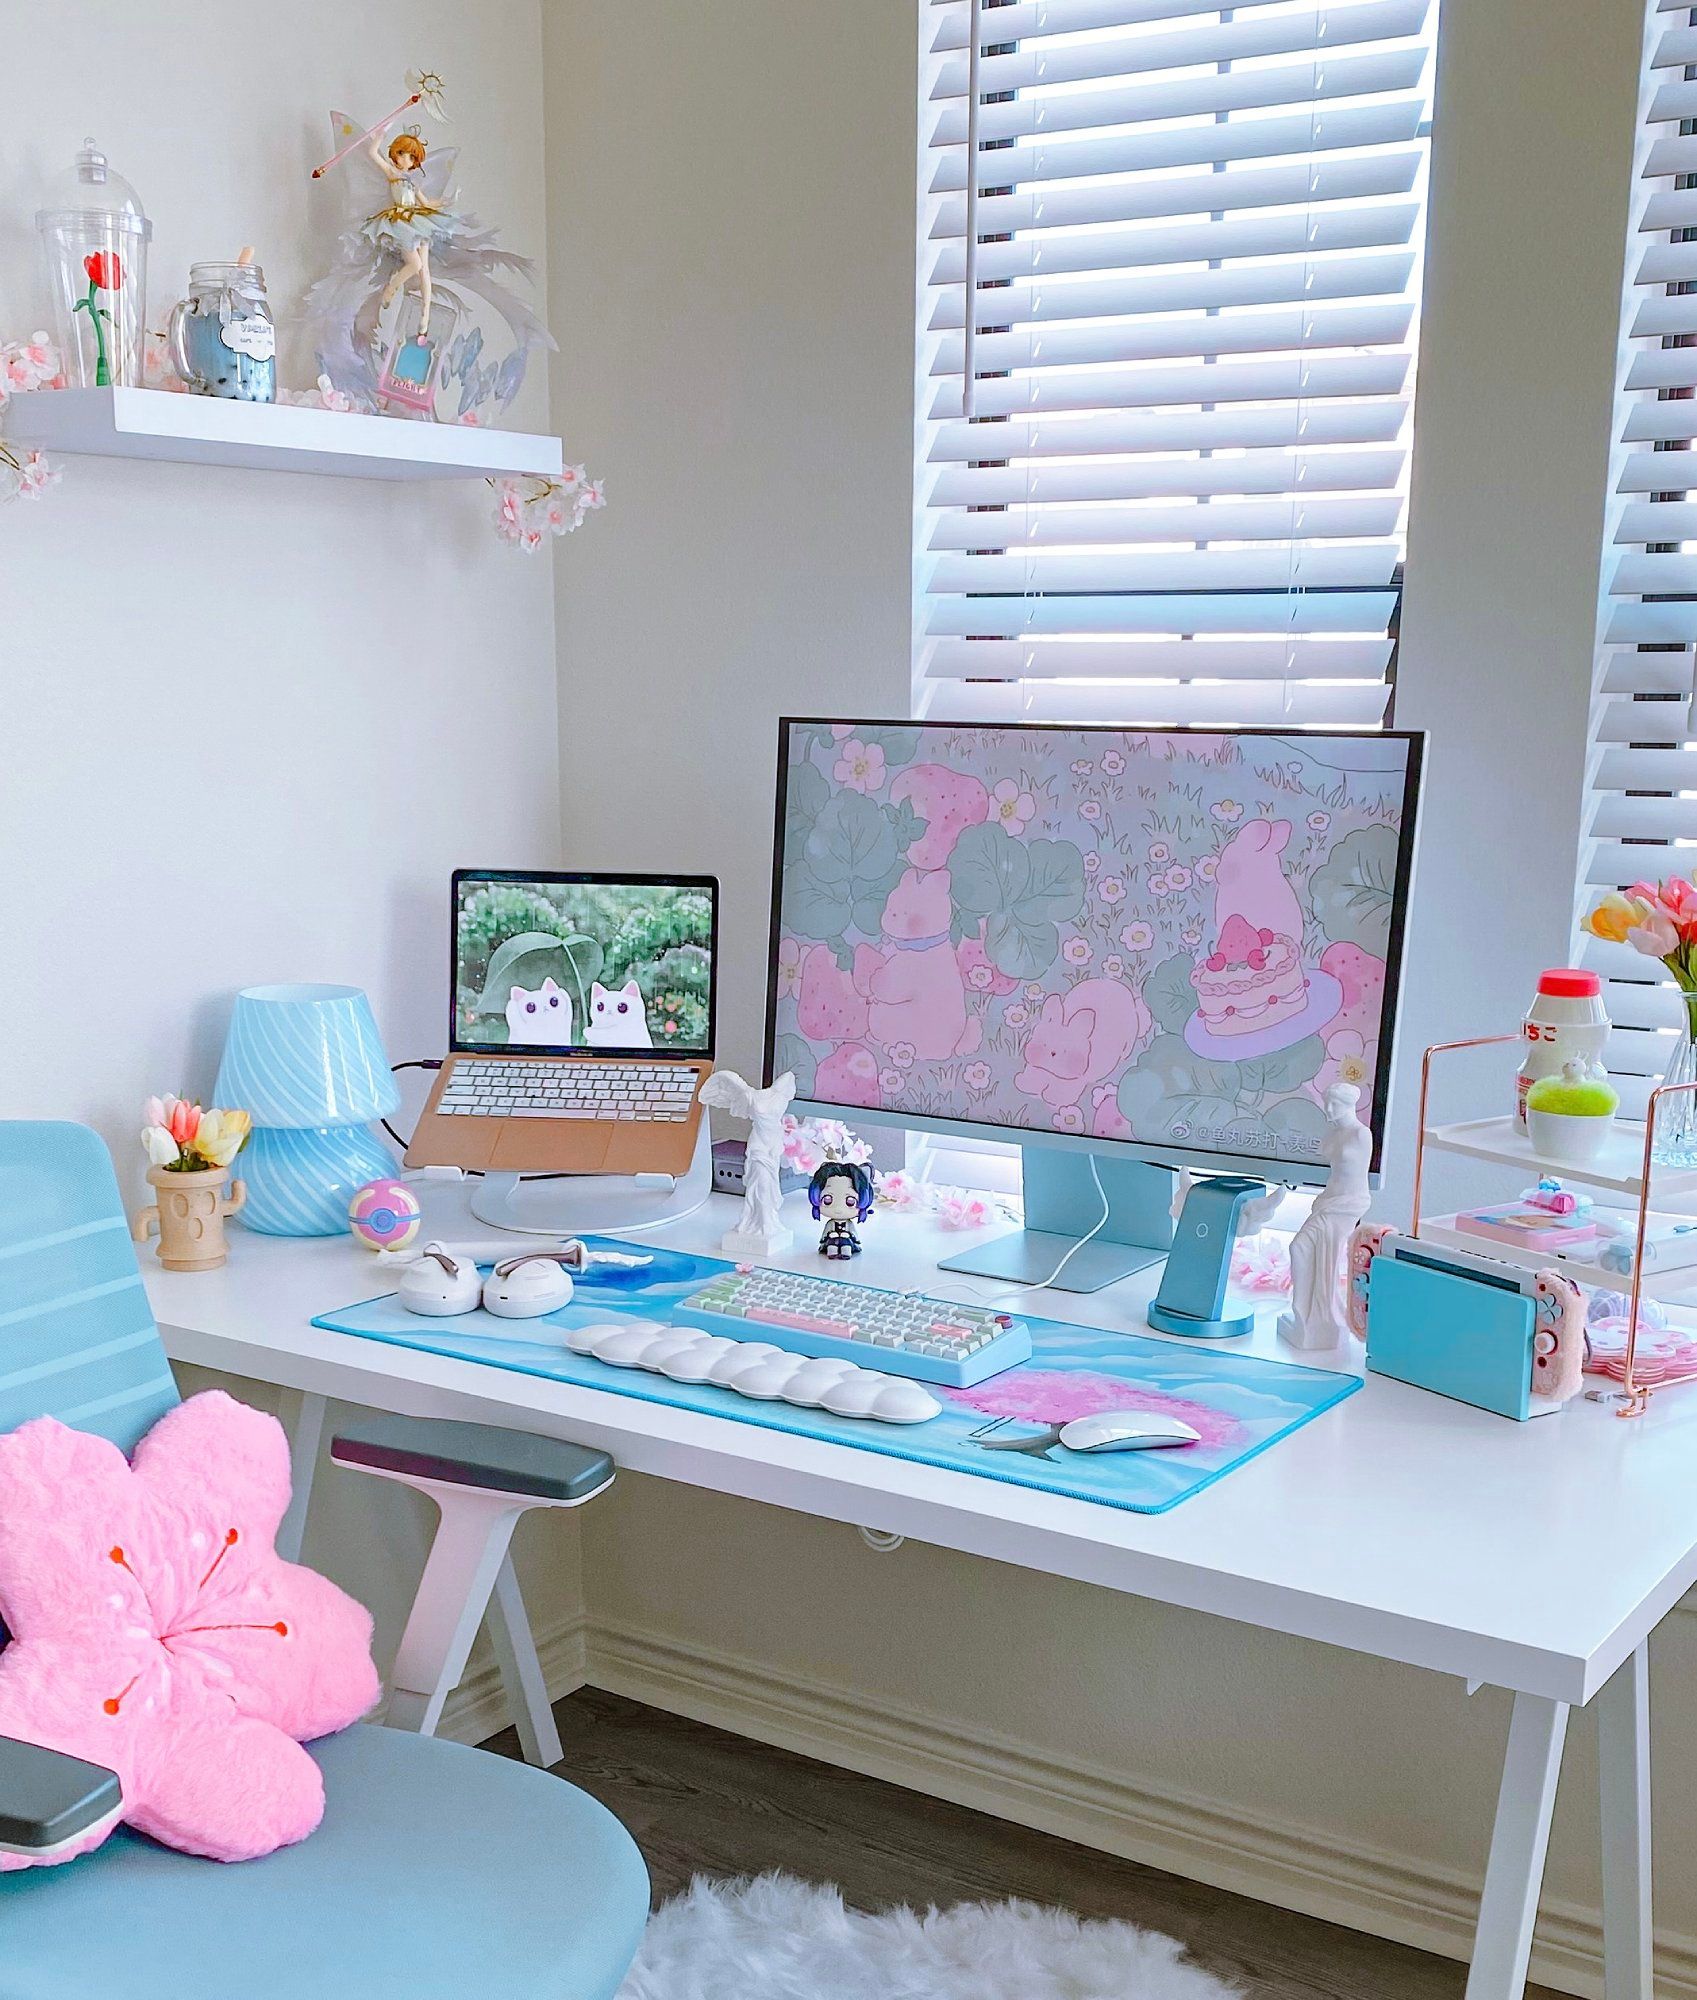 A cute pink and blue gaming setup